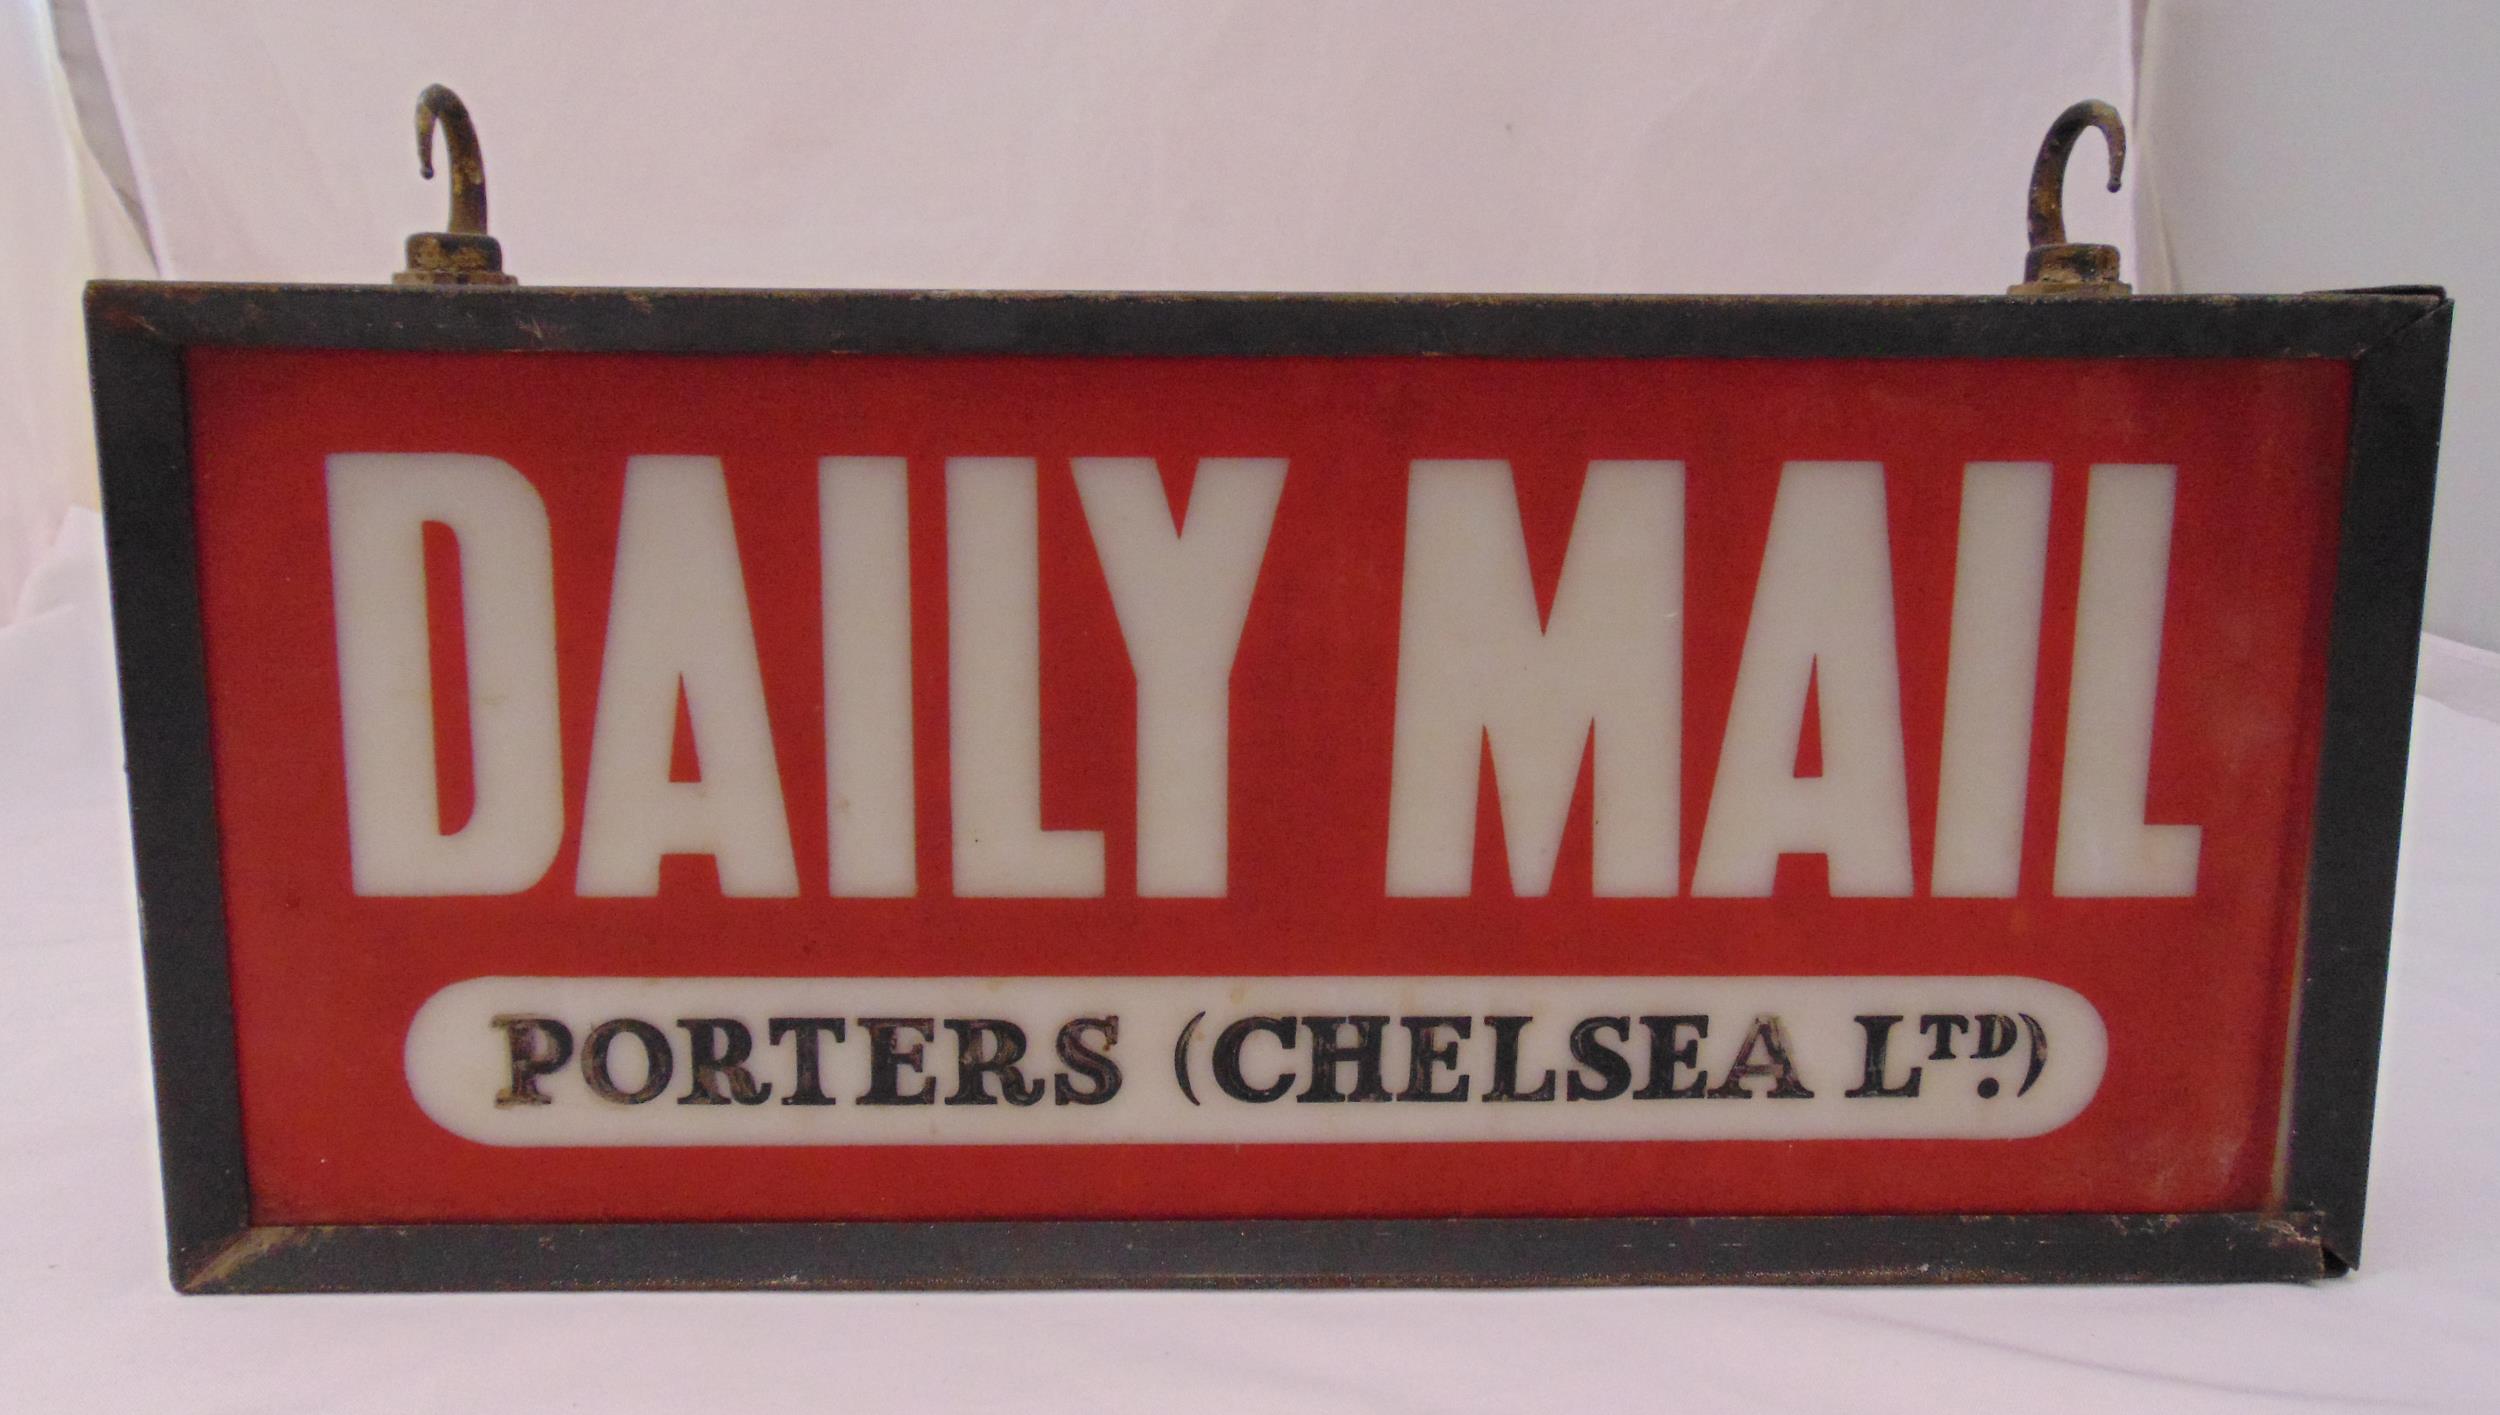 An original hanging Daily Mail adverting sign made of metal and glass with two suspensory hooks